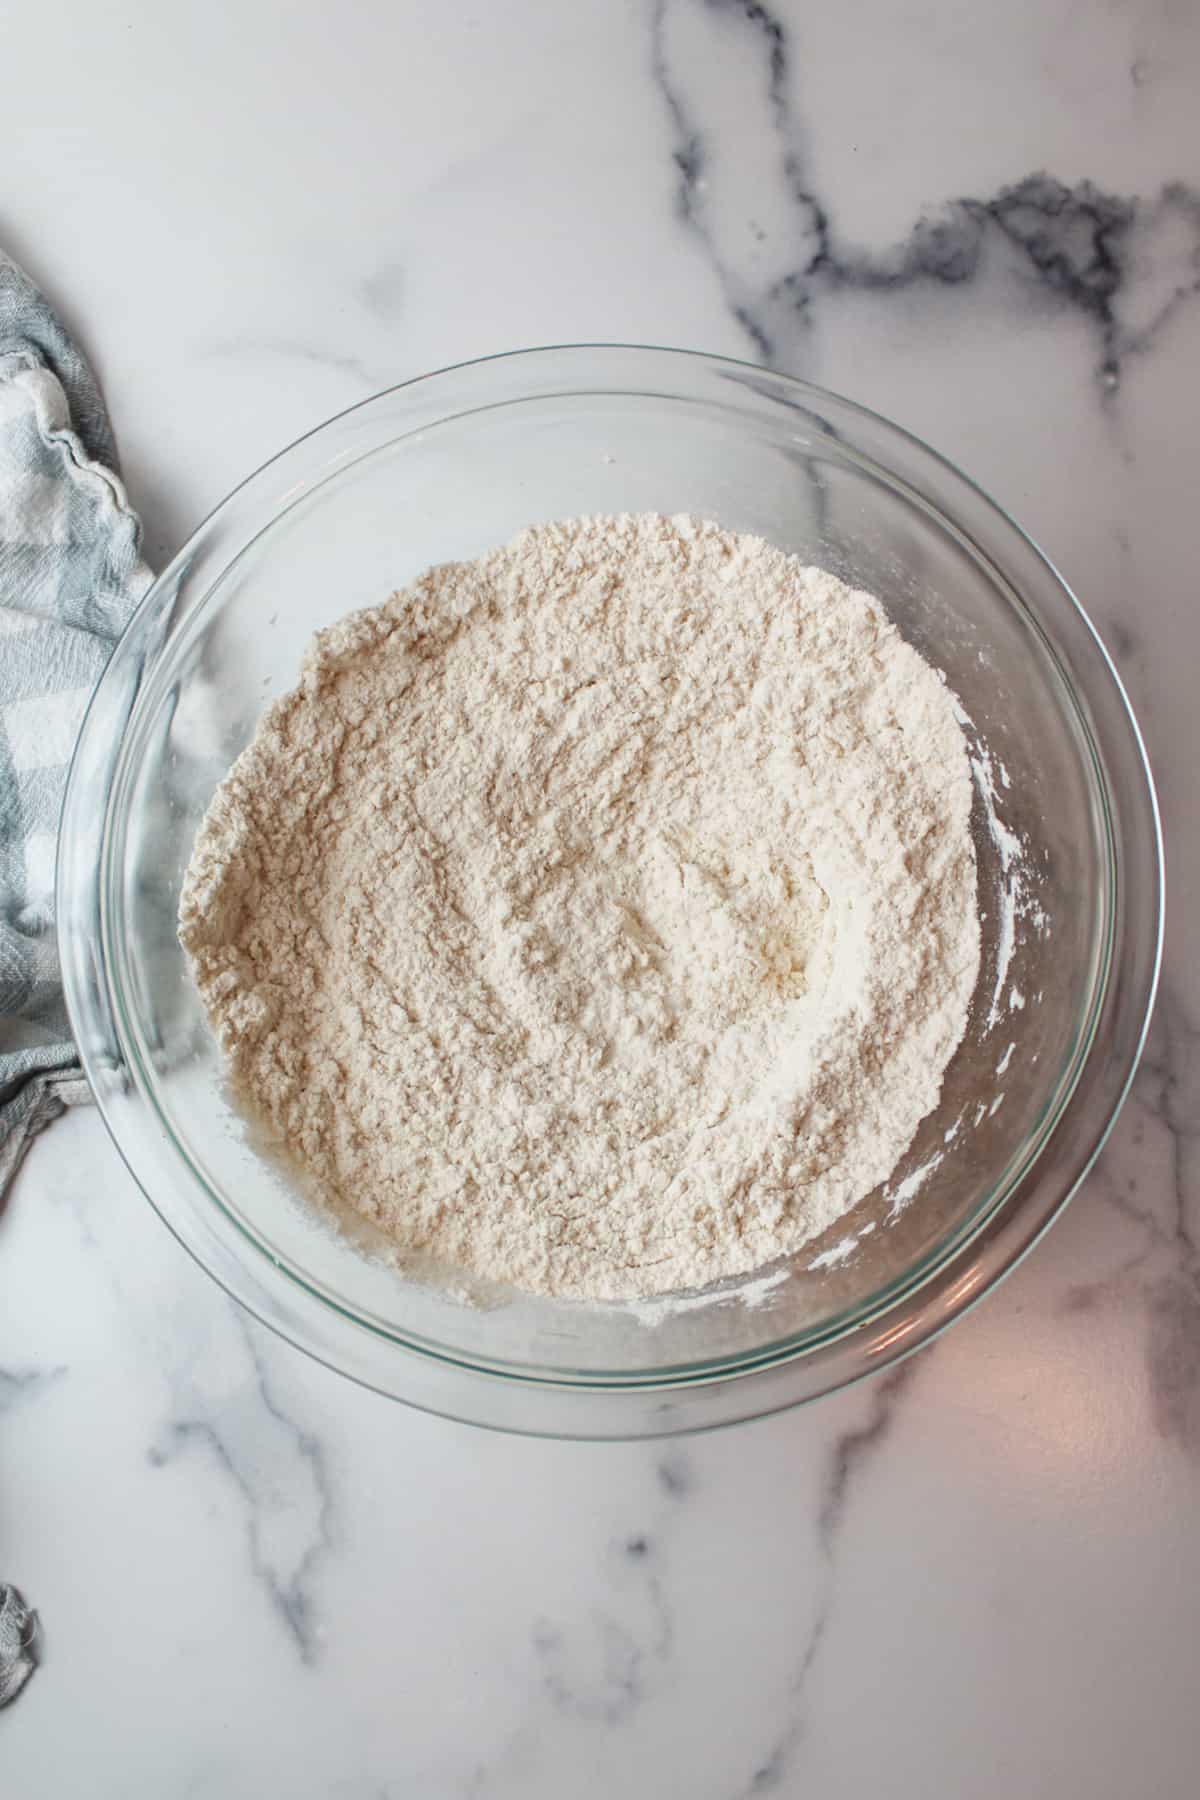 whisked yeast and flour mixture in a mixing bowl